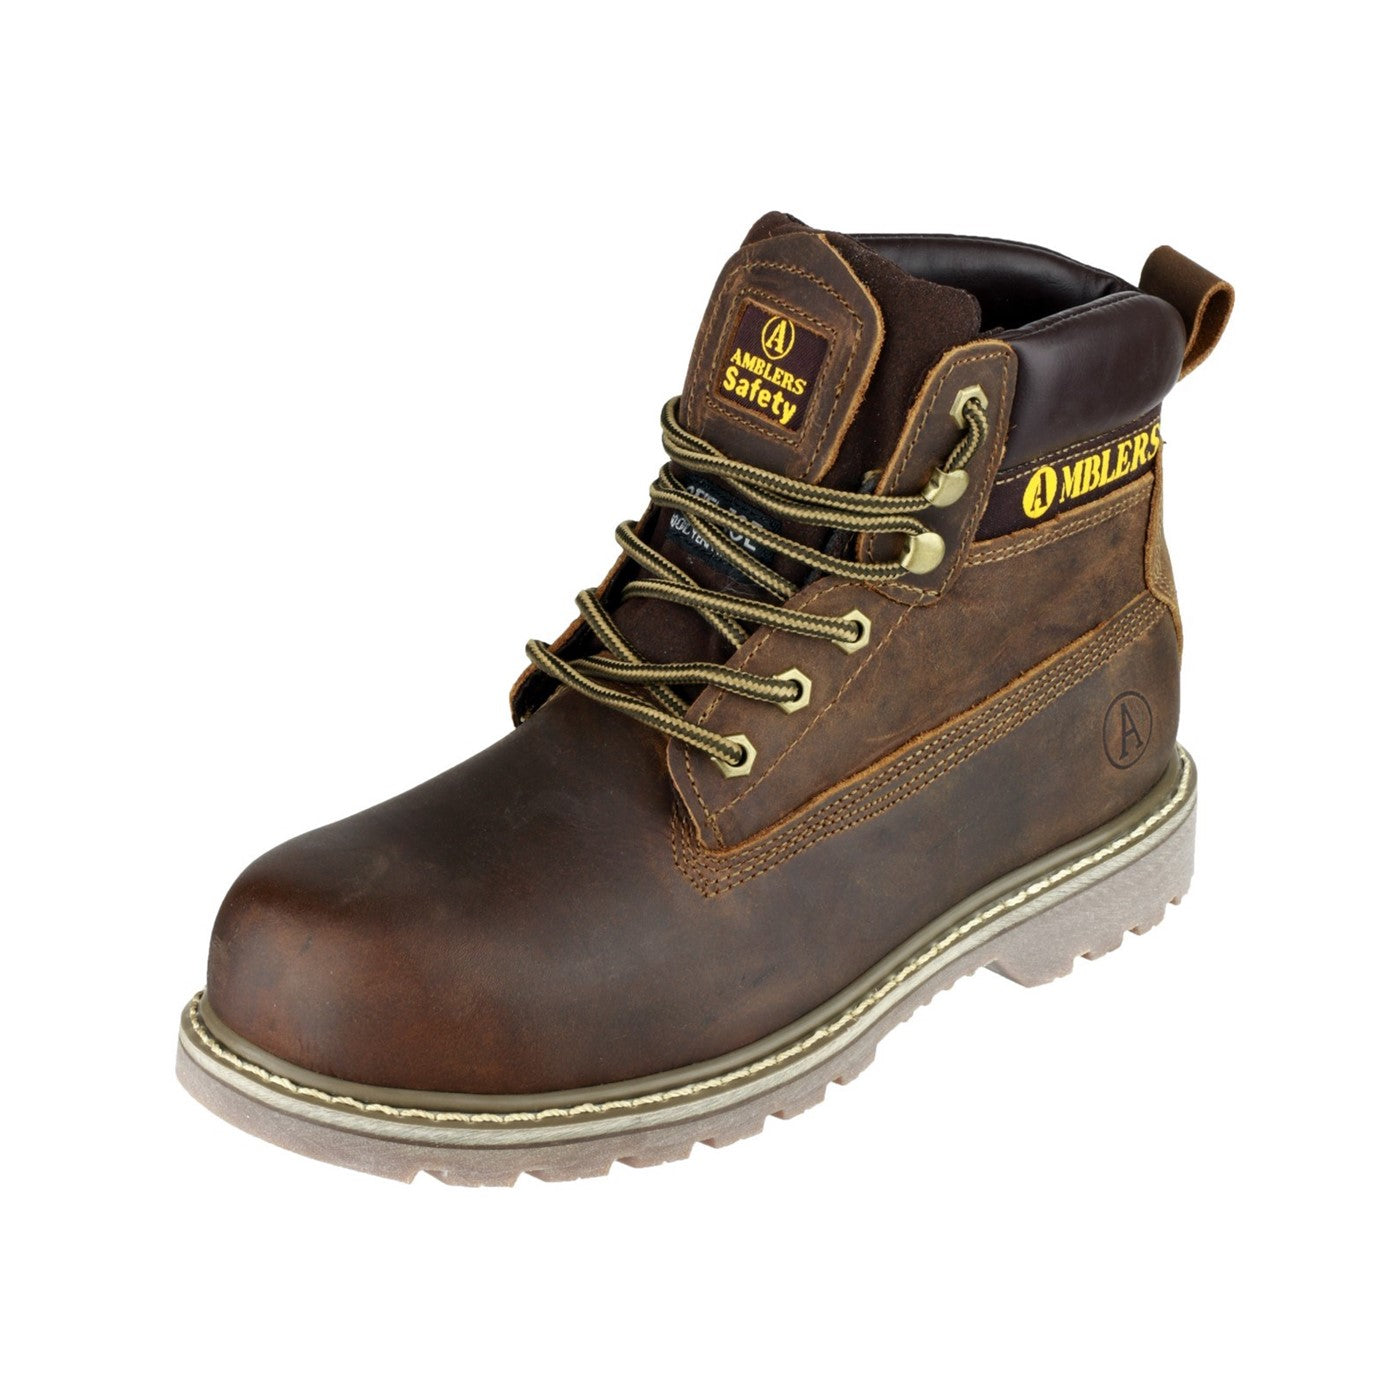 Unisex Amblers Safety FS164 Industrial Safety Boot